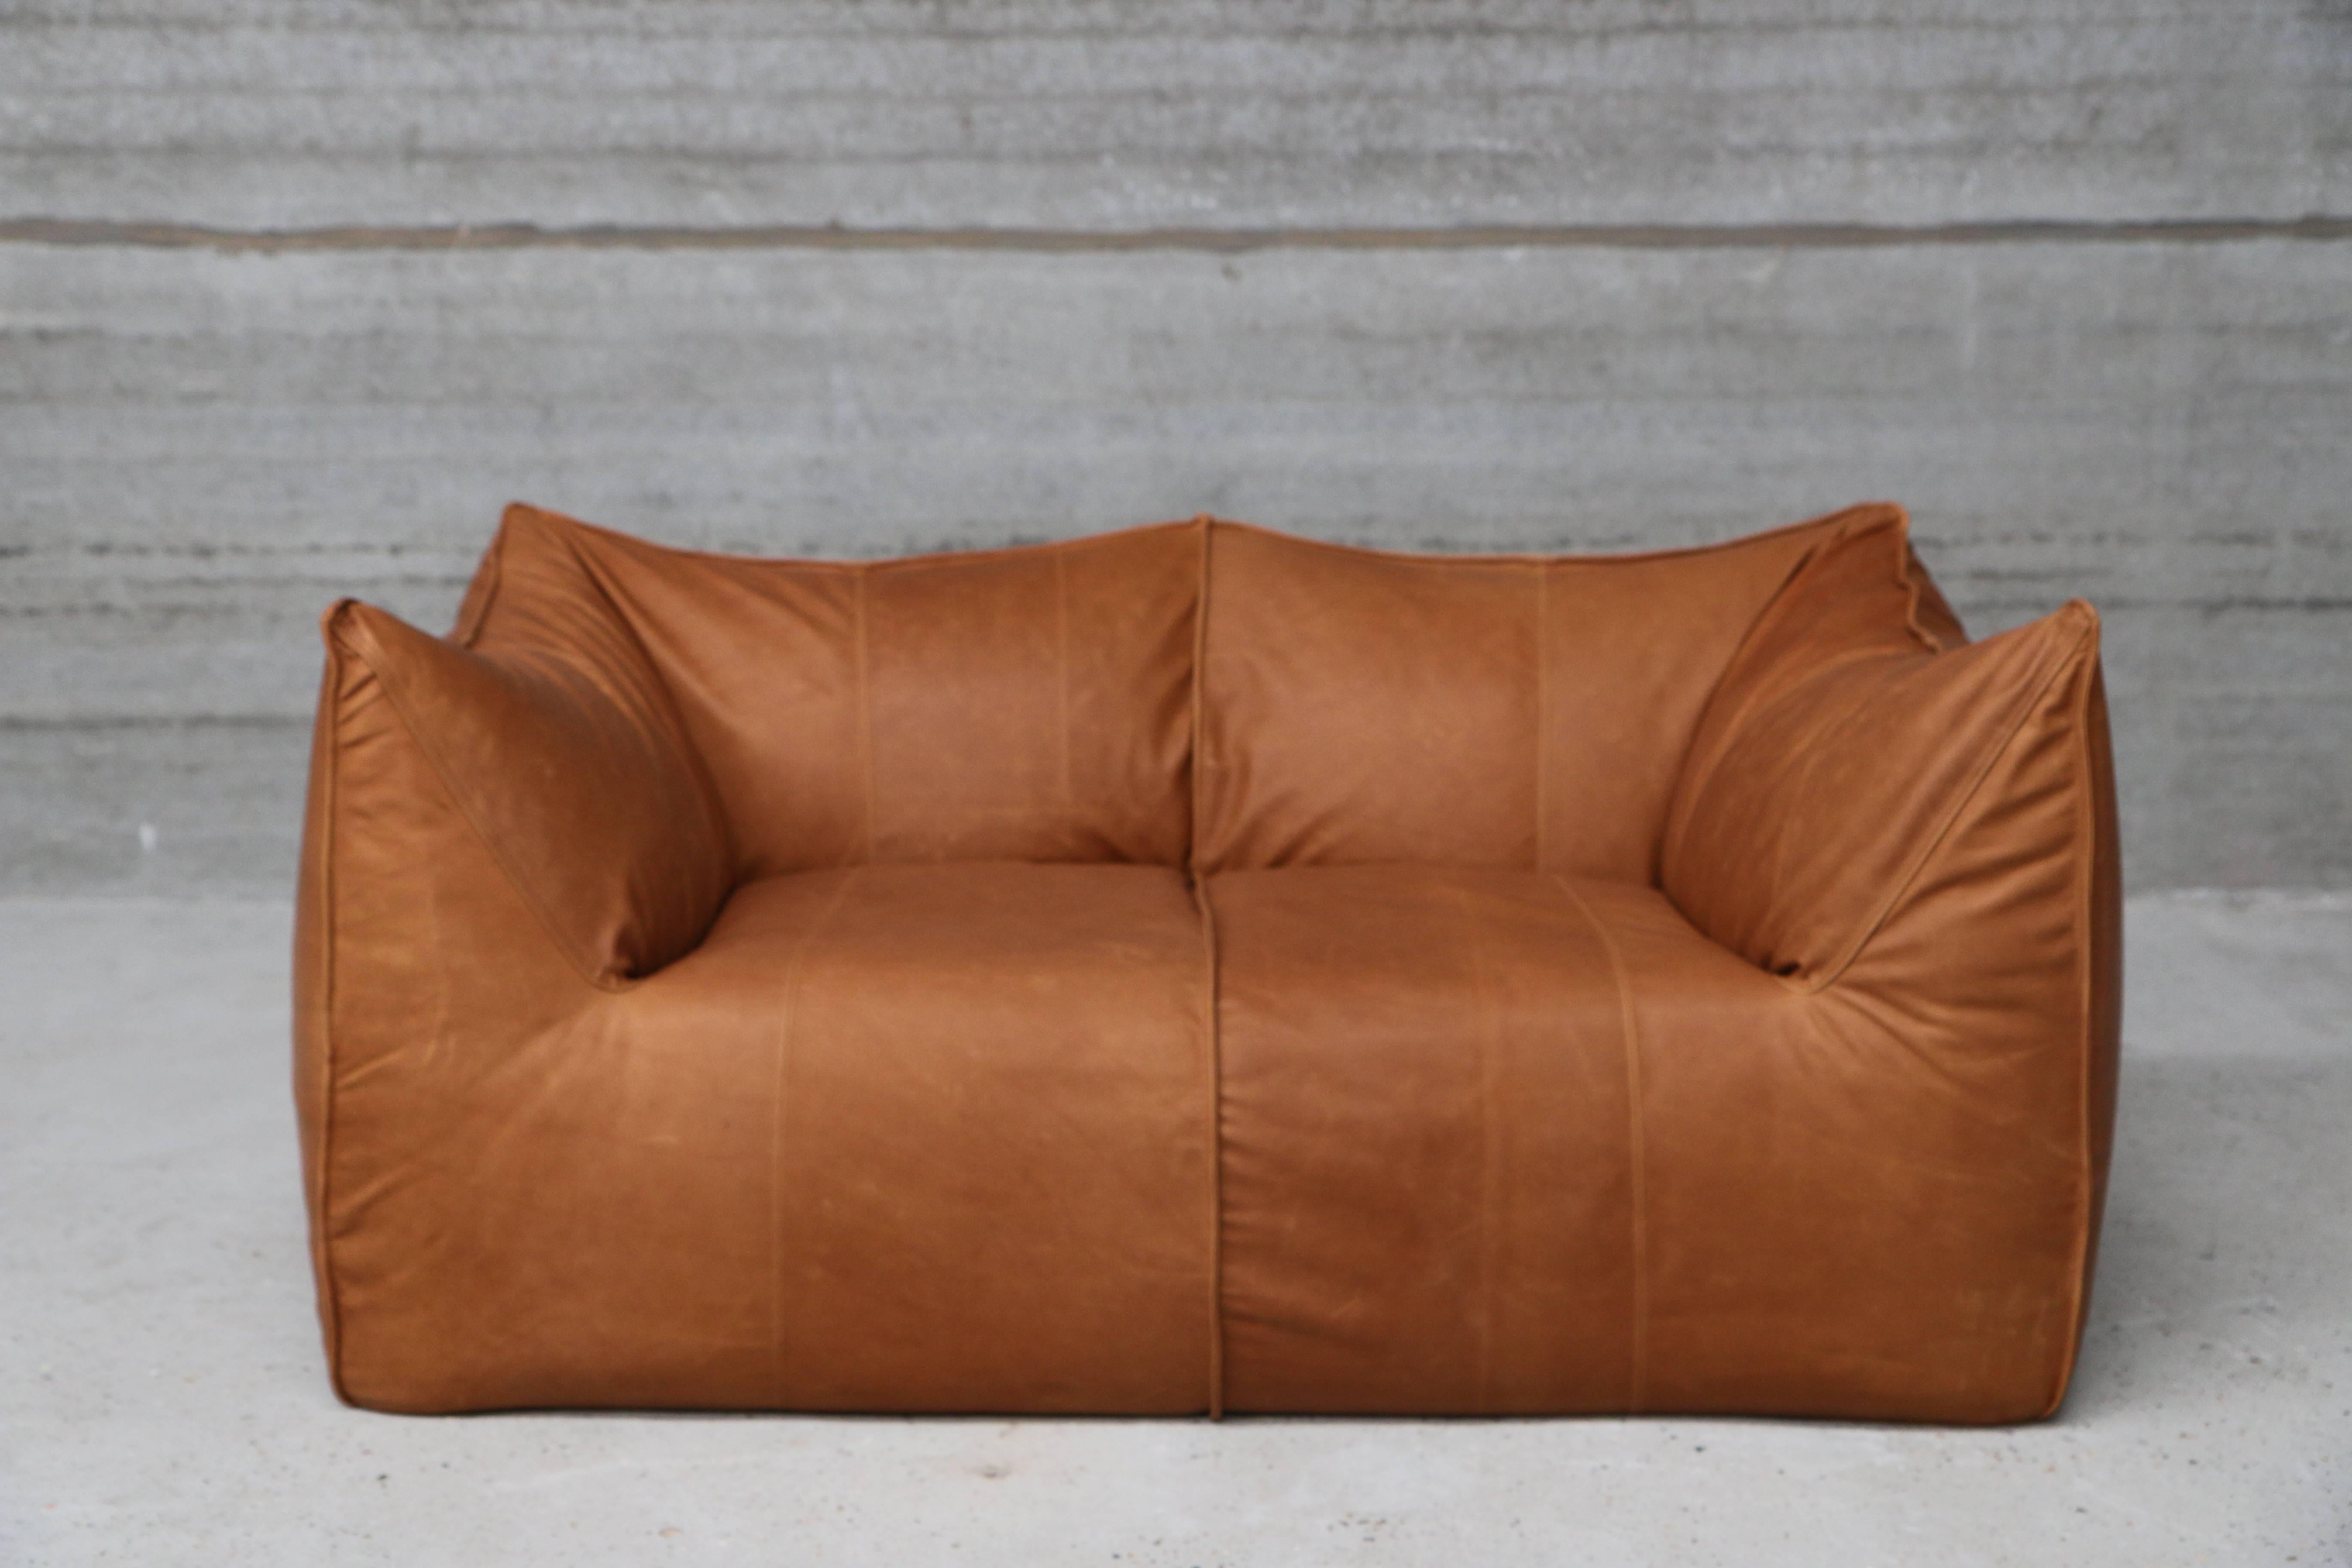 Vintage Mario Bellini bambole loveseat for B&B, Italia, 1970 cognac leather.
This is a re-upholstery project.
Foam in very good condition, full grain leather, biologically colored. Stunning condition
Dimensions: L 167, D 89, H 73, SH 40 cm.